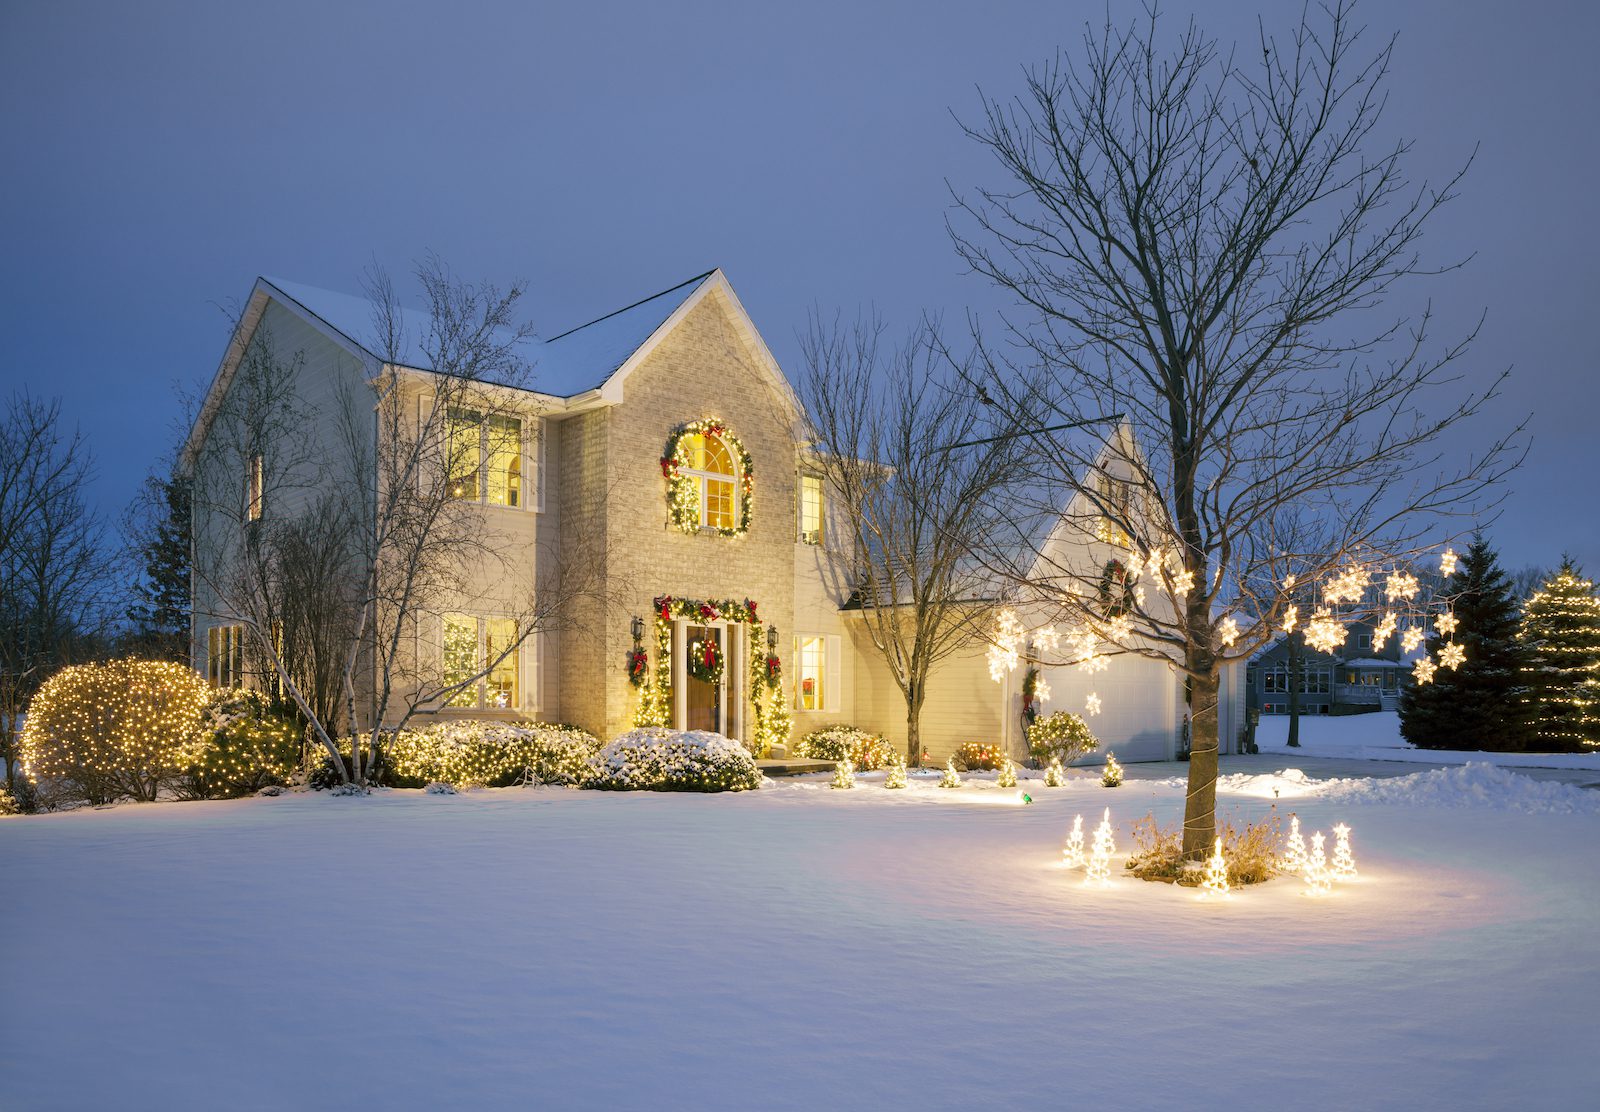 Christmas Decorated Home With Holiday Lighting, Snow